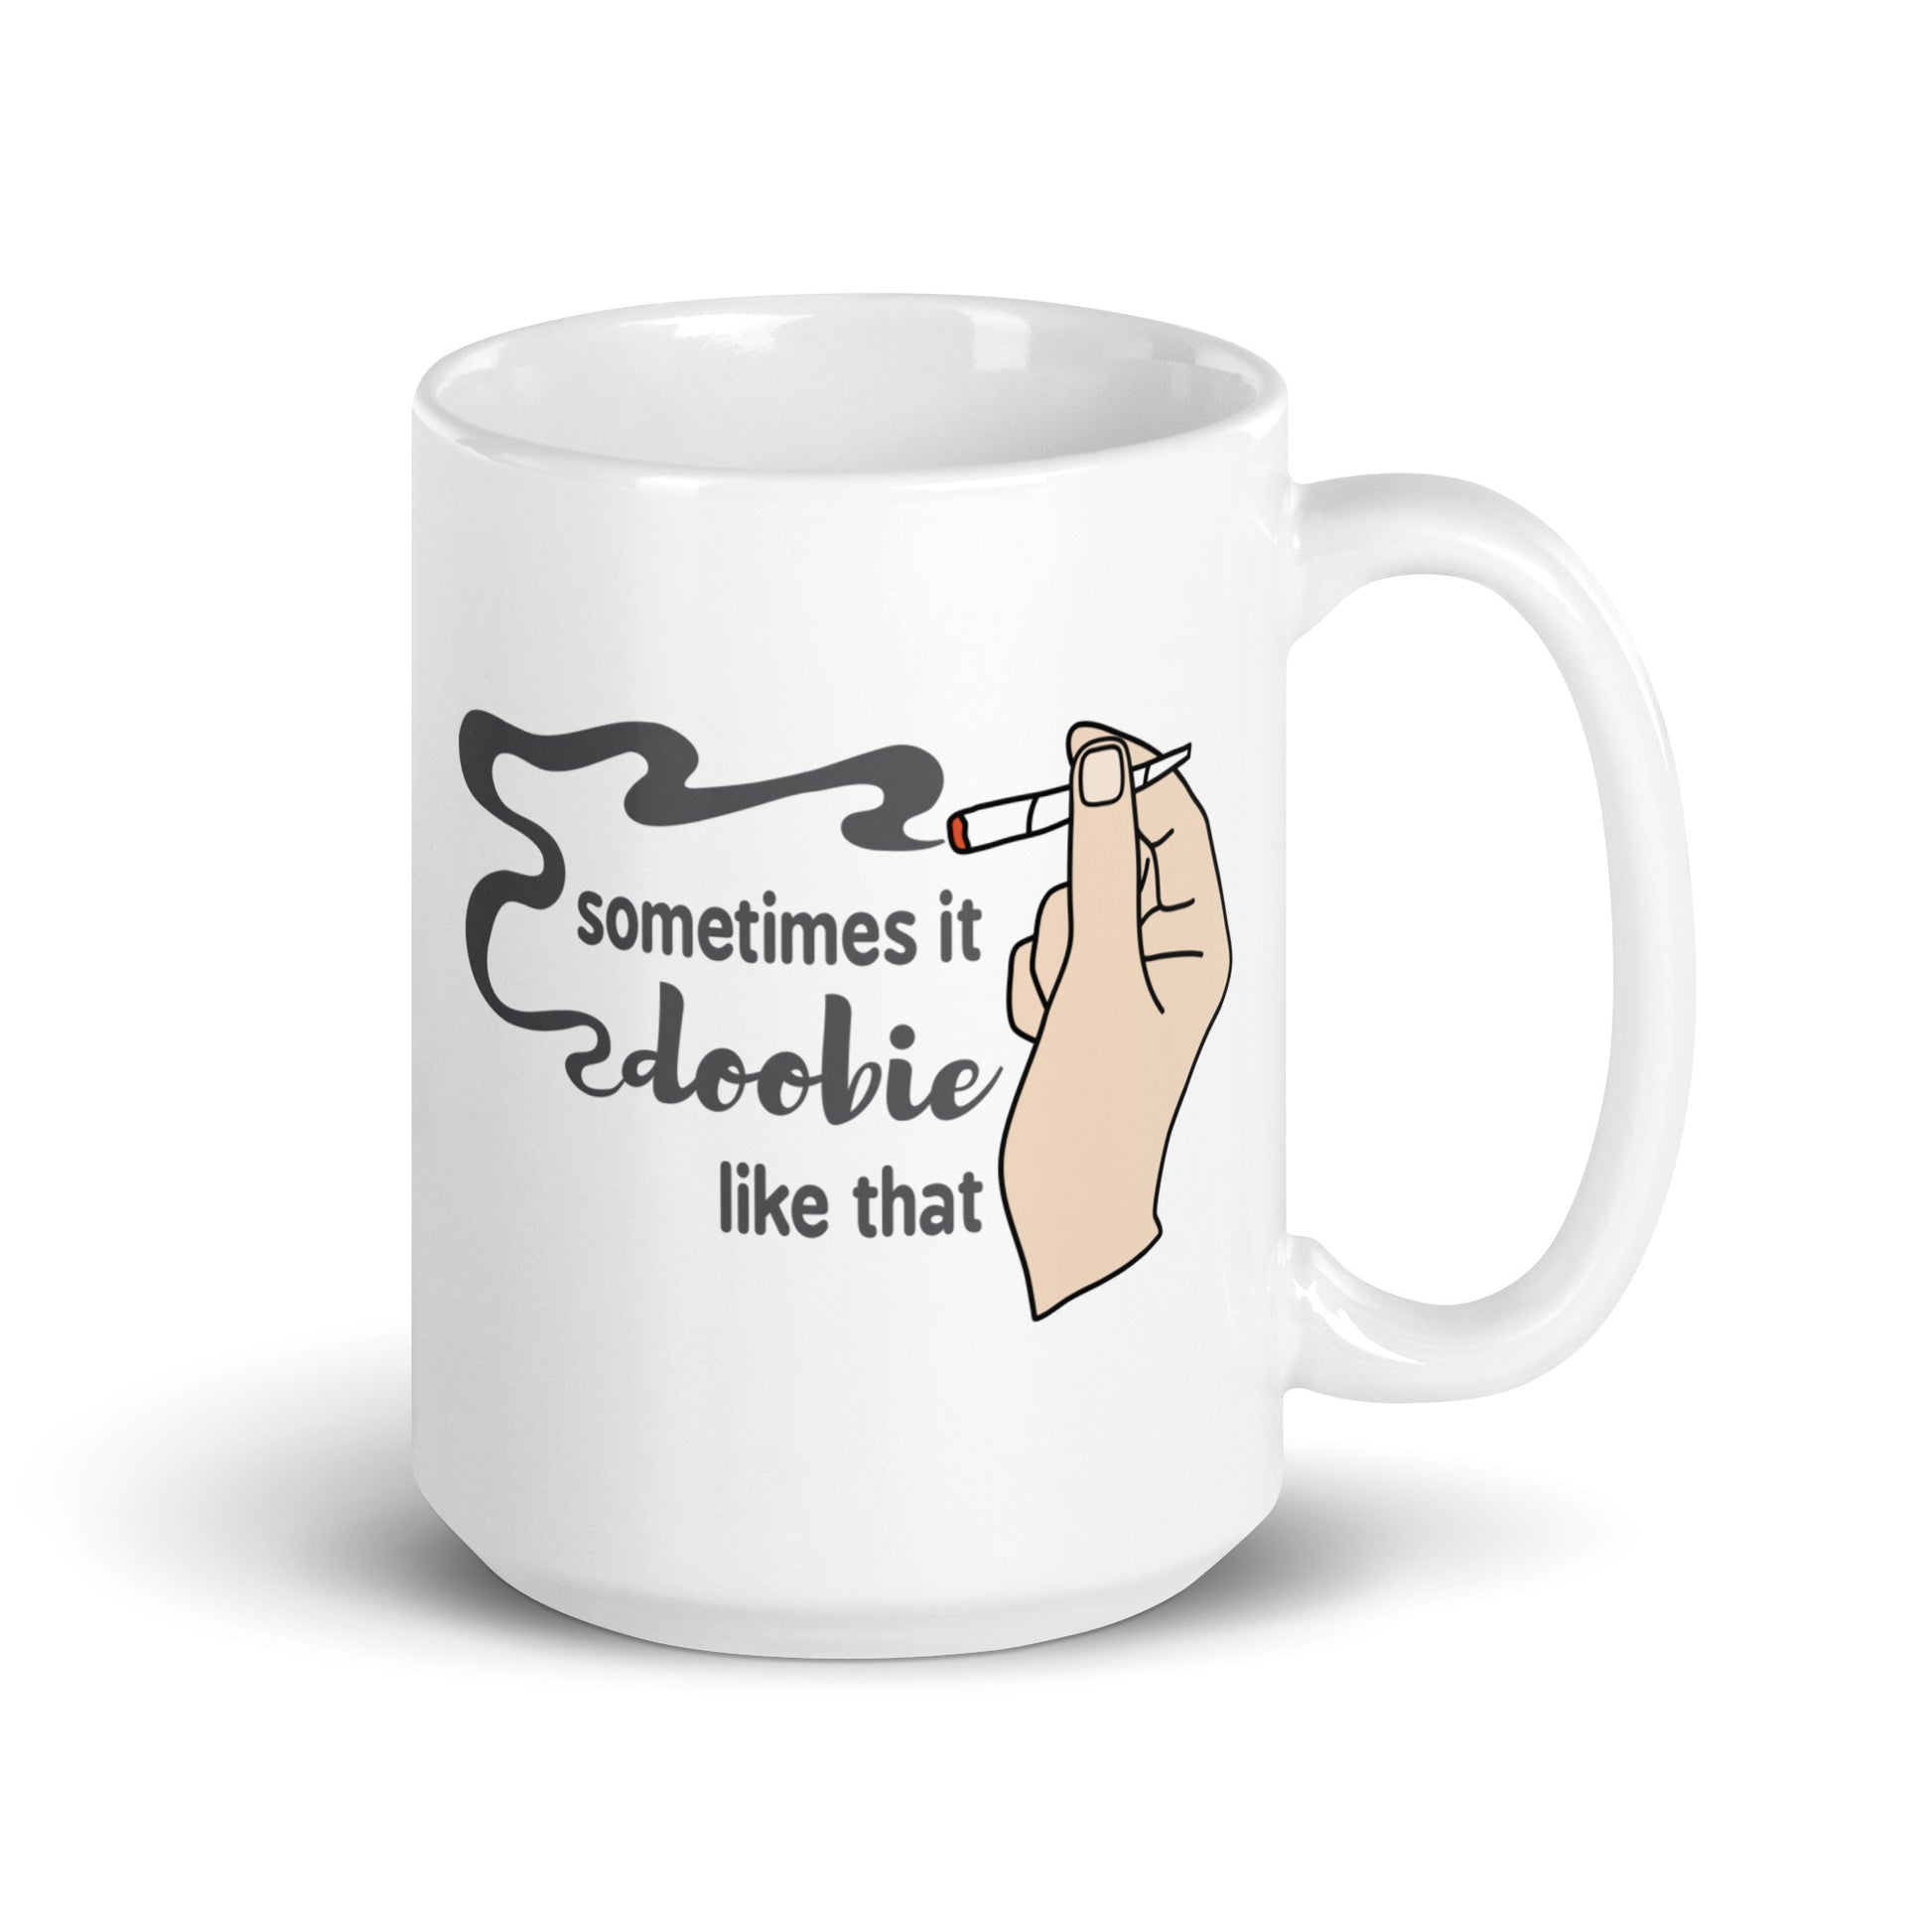 A white 15 ounce ceramic coffee cup featuring an illustration of a hand with light skin holding a joint. Text alongside the hand reads "sometimes it doobie like that" with the word "doobie" made from smoke from the joint.